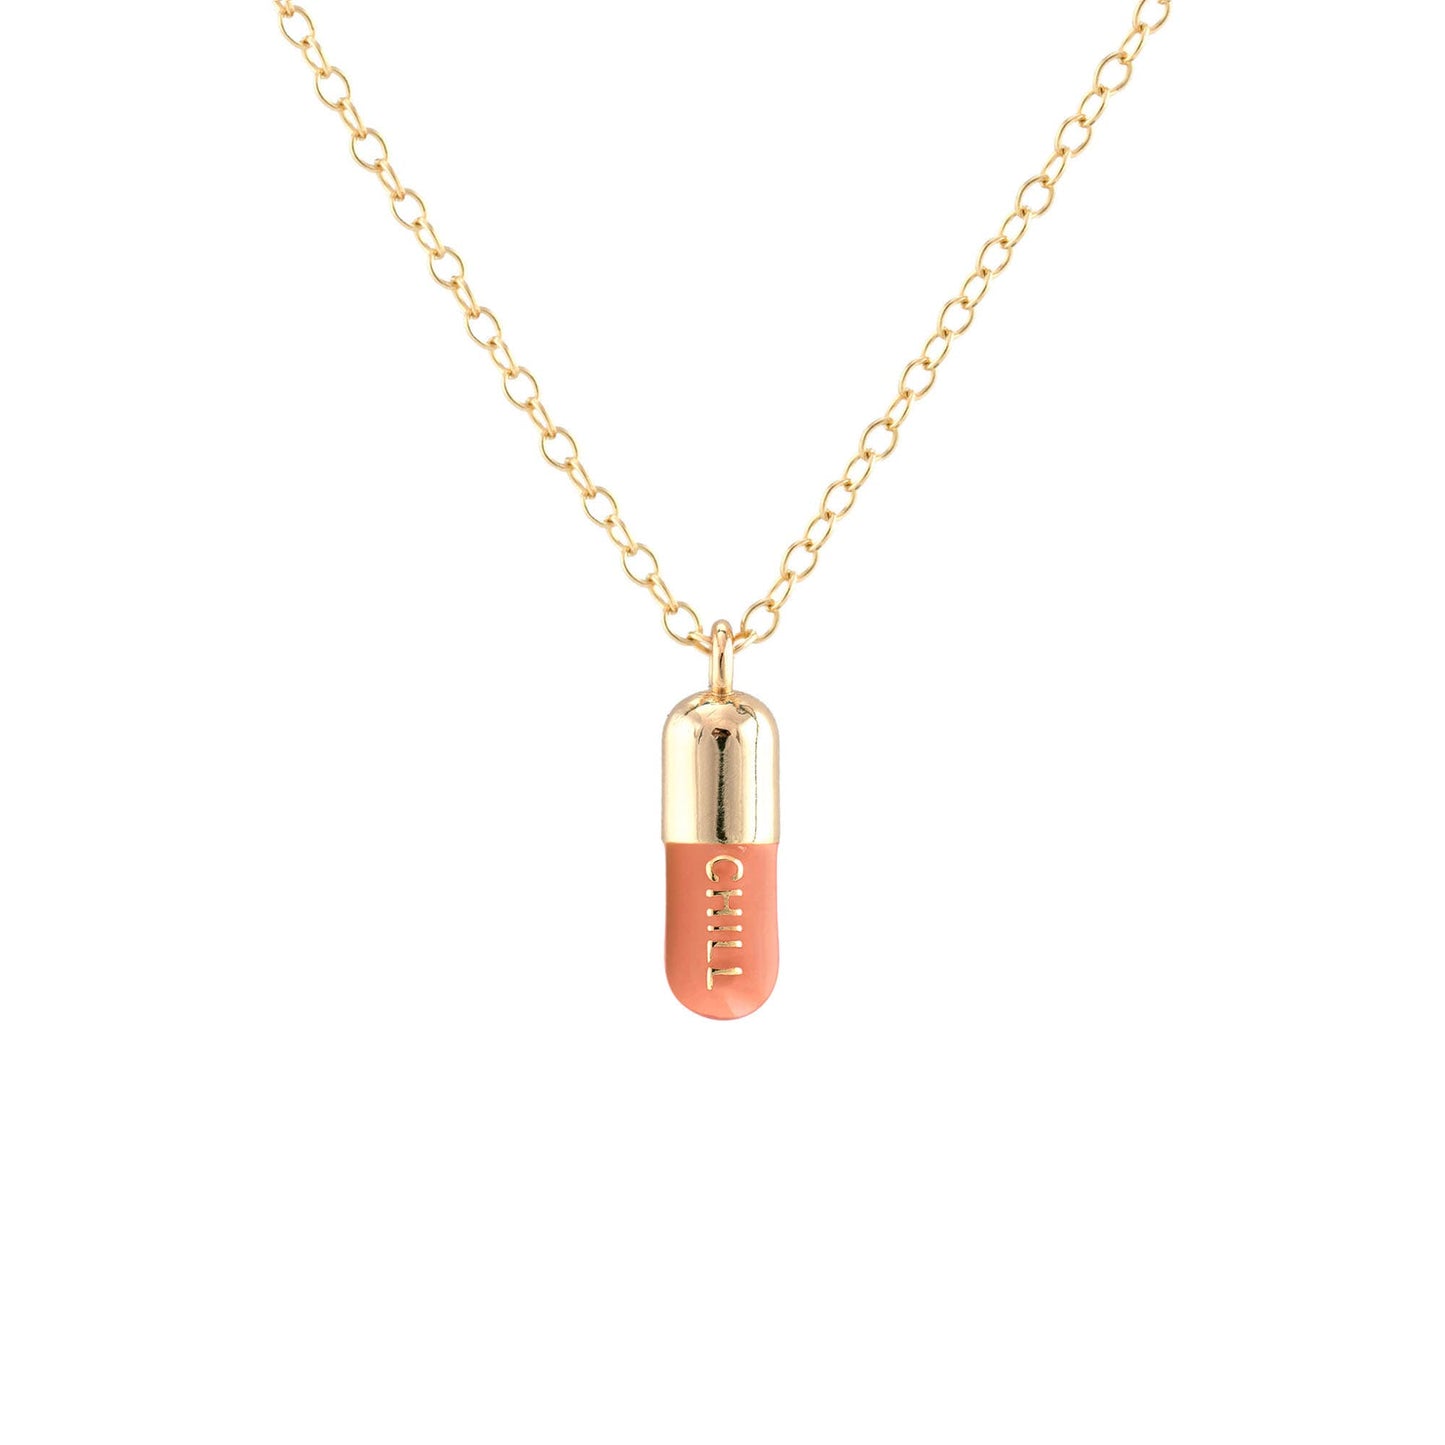 Chill Pill Enamel Necklace: Pink Sky